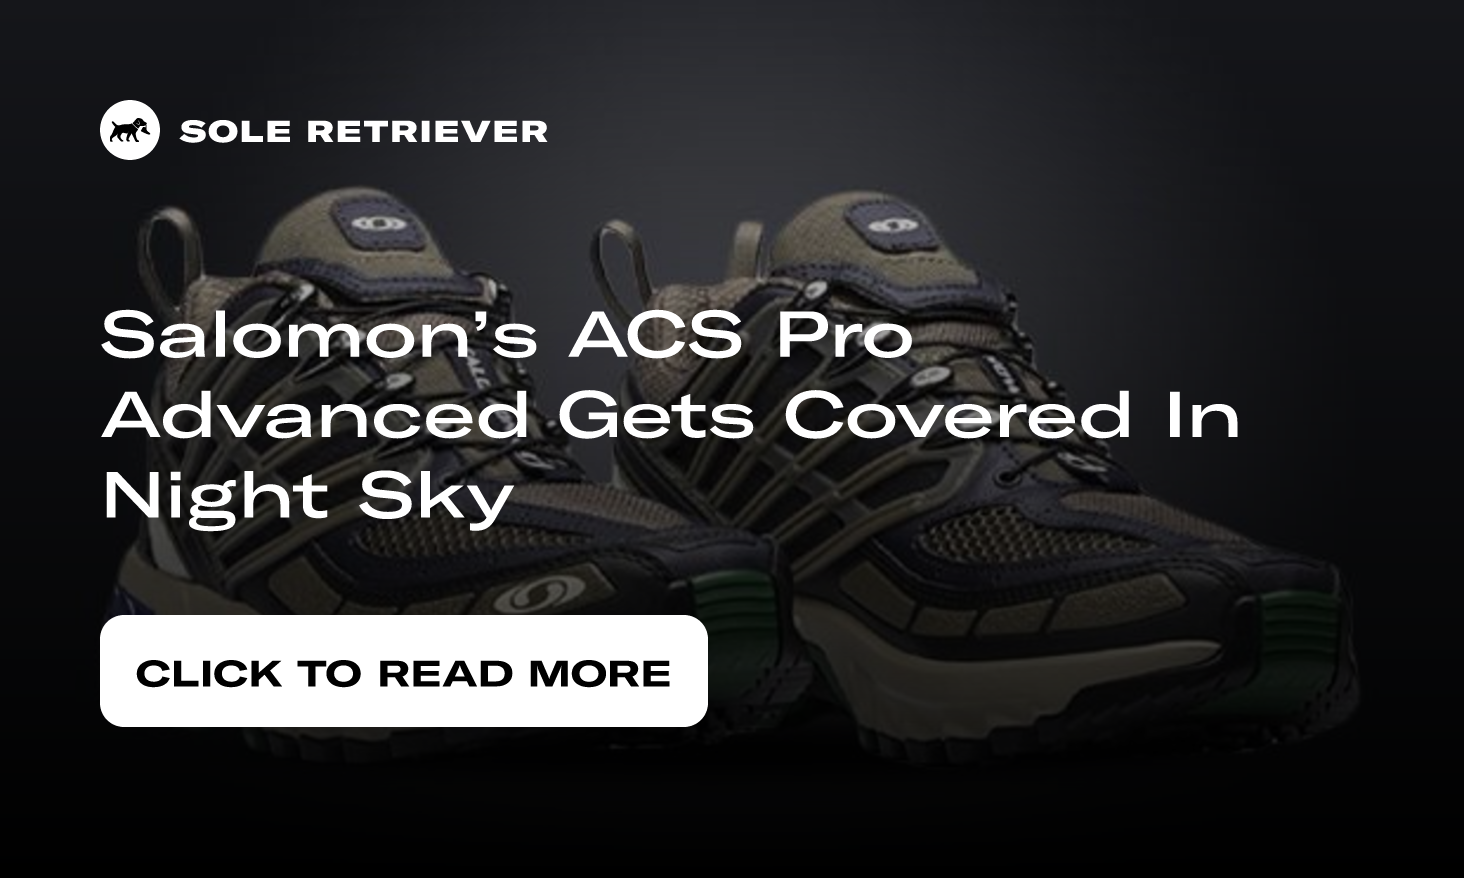 Salomon's ACS Pro Advanced Gets Covered In Night Sky